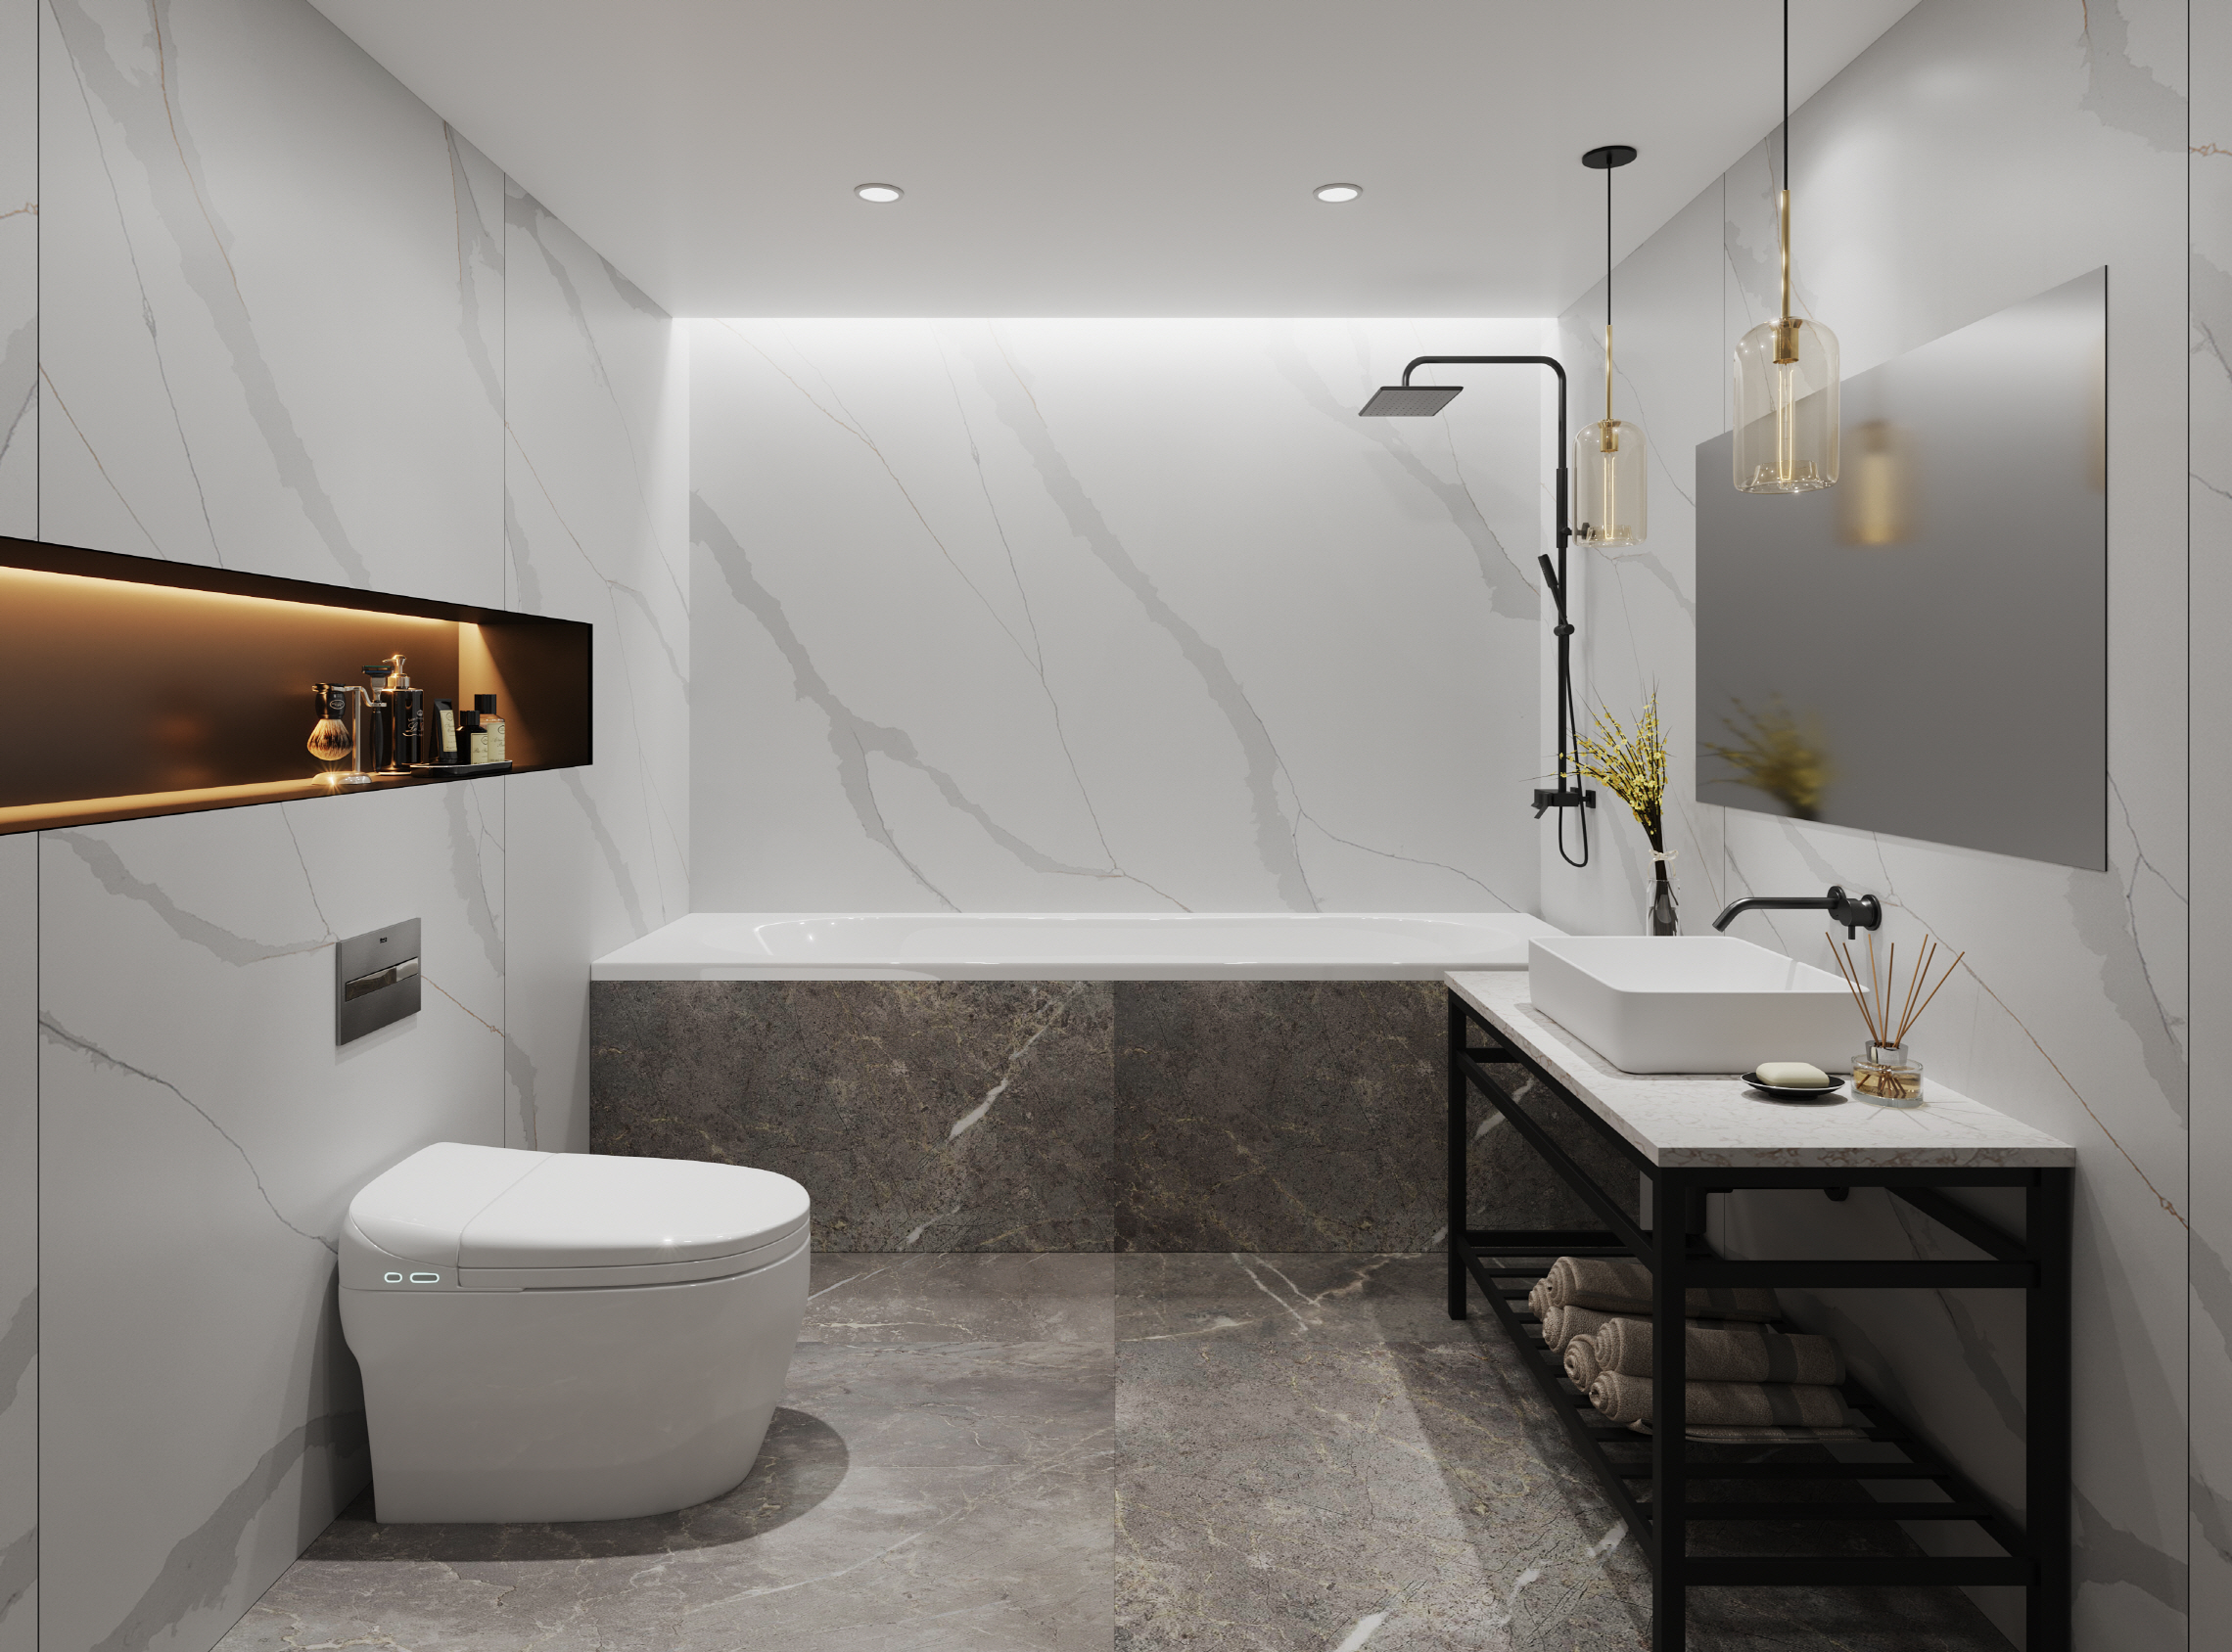 LX Hausys VIATERA  - For a modern, elegant guest bathroom, choose minimalist fixtures and sleek, contemporary finishes.